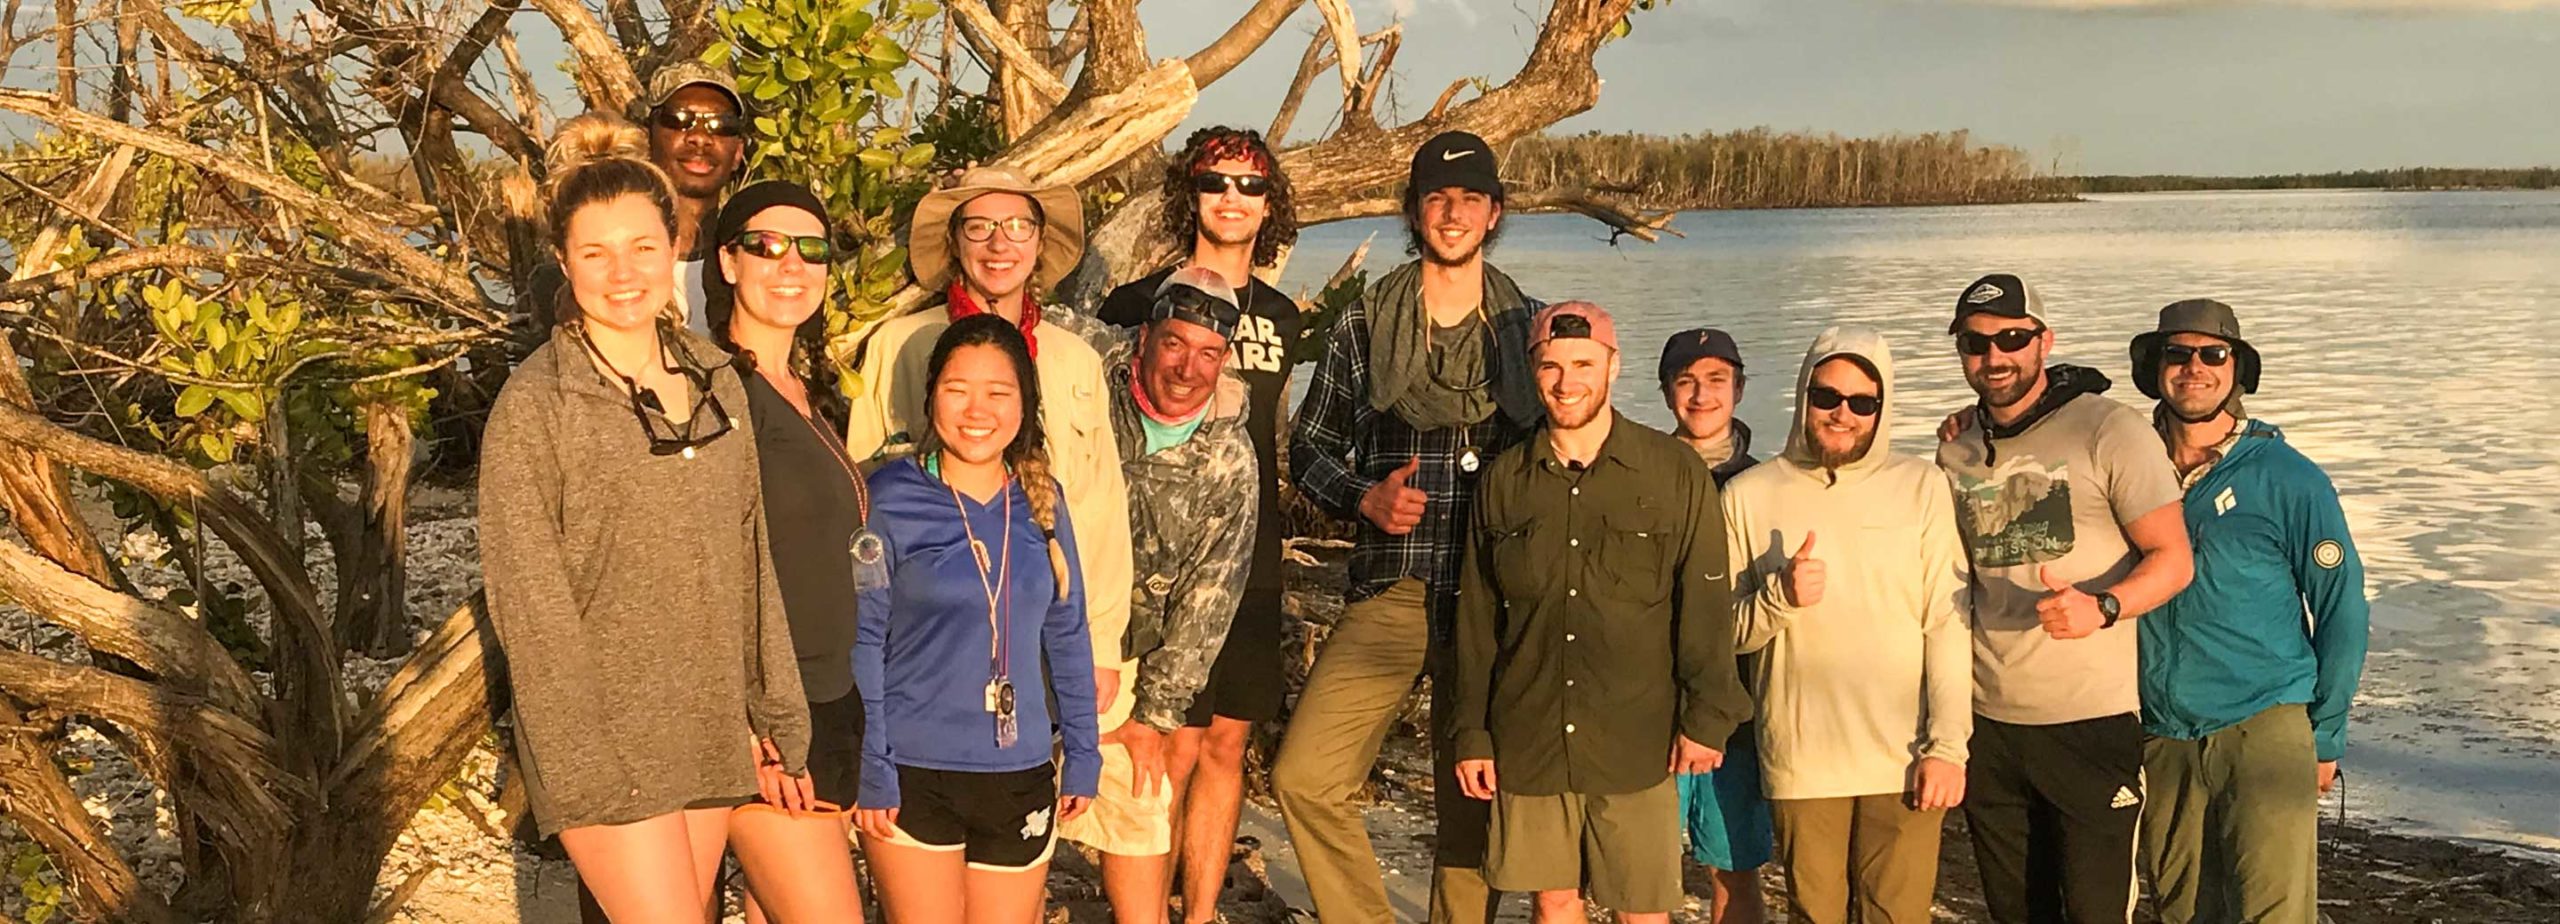 Group of teens in the Florida Everglades